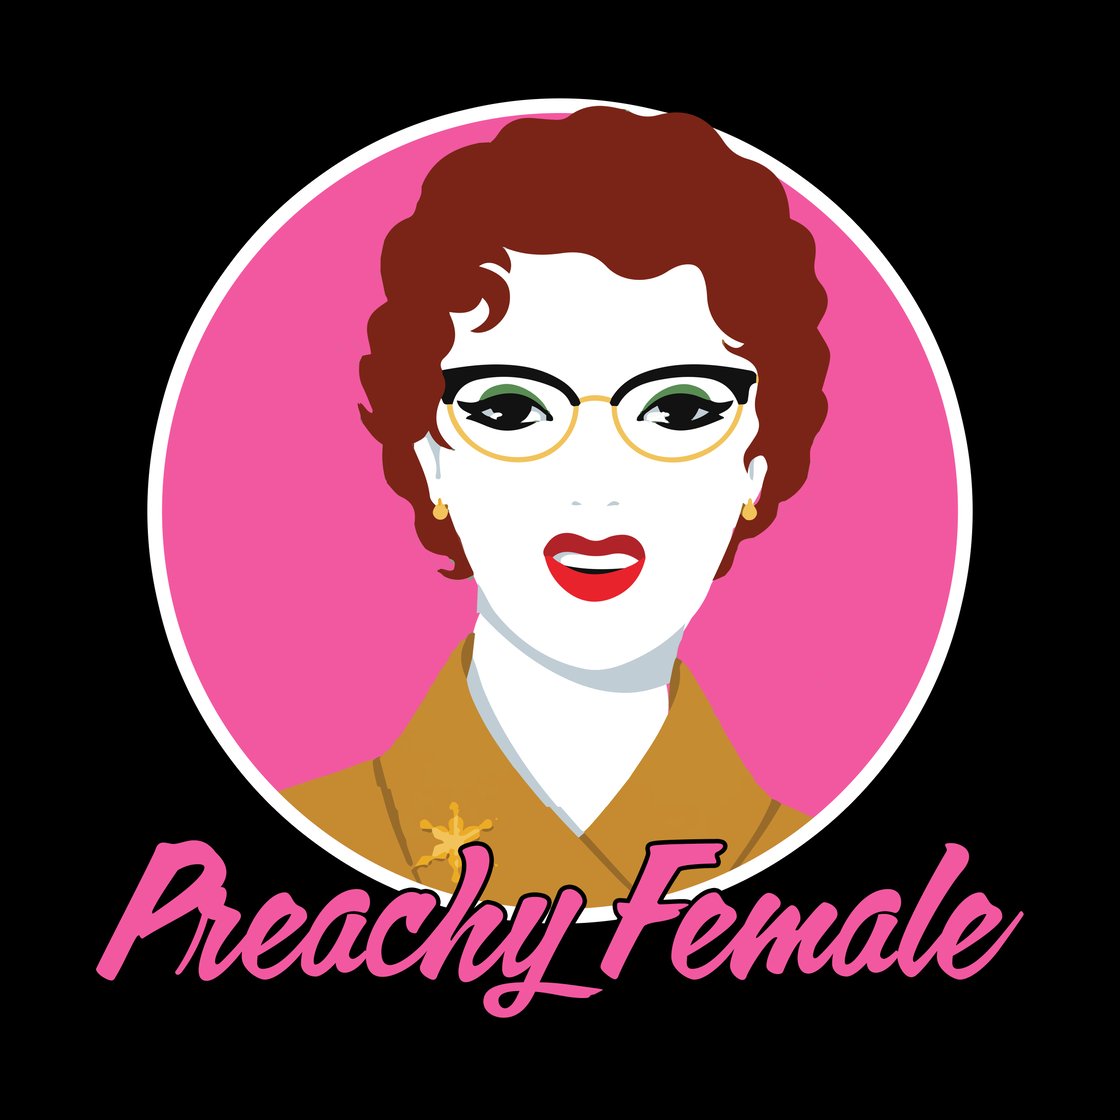 Image of Preachy Female